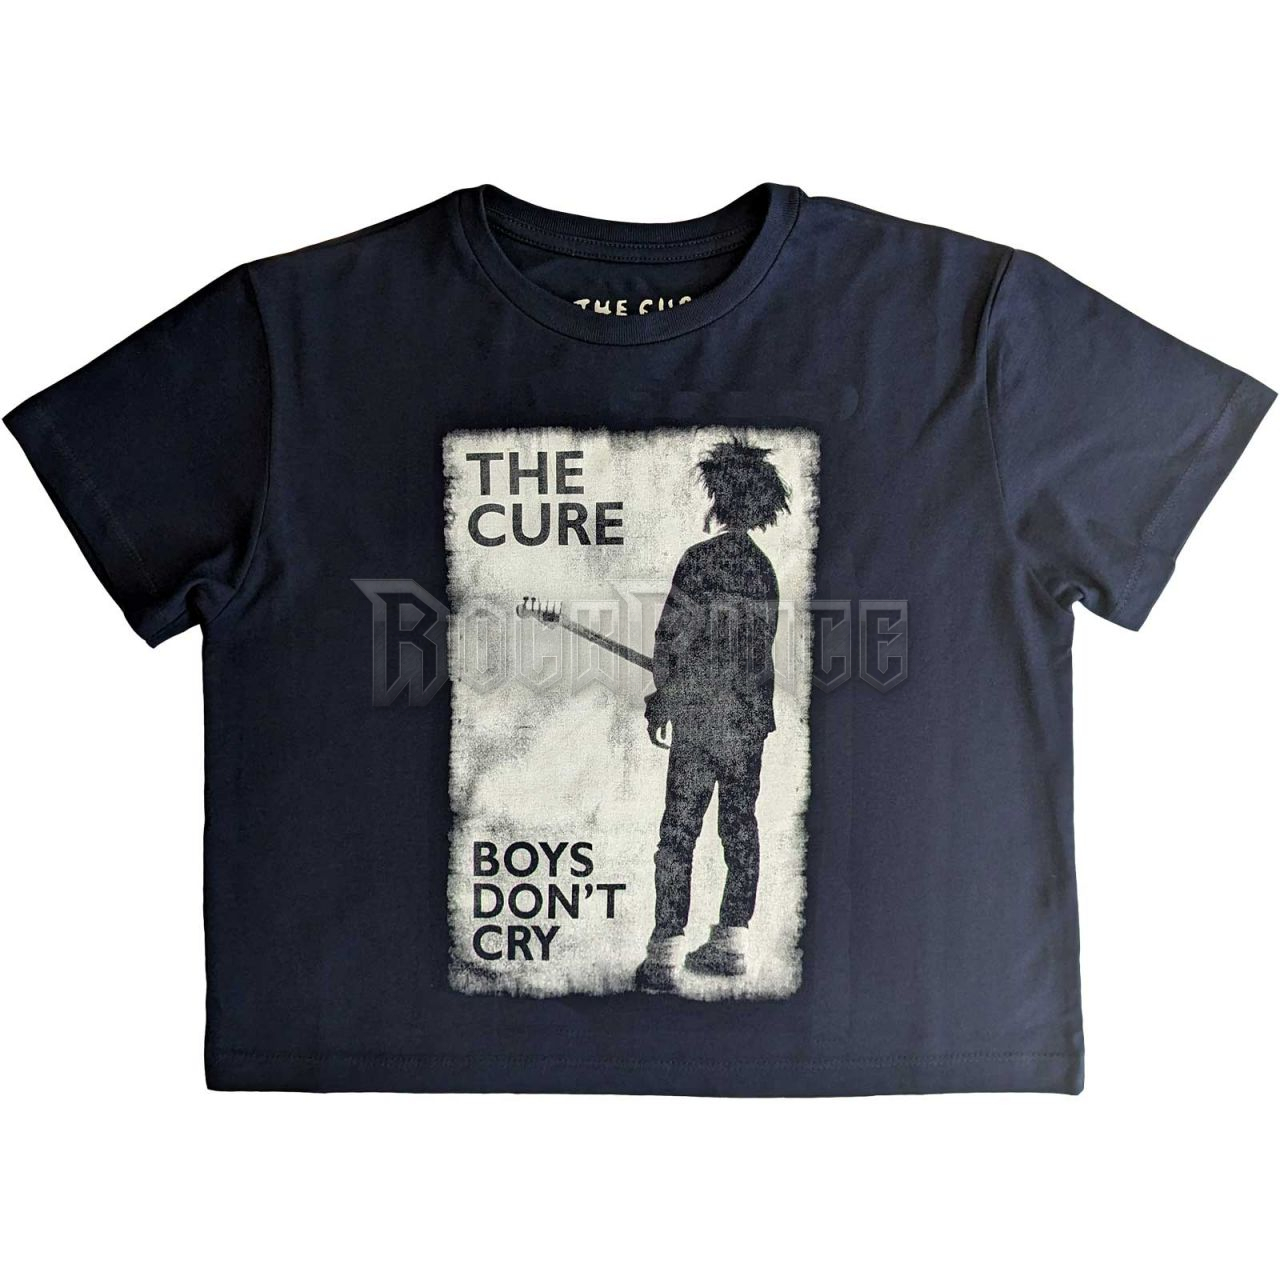 The Cure - Boys Don't Cry B&W - női crop top - CURECT04LN